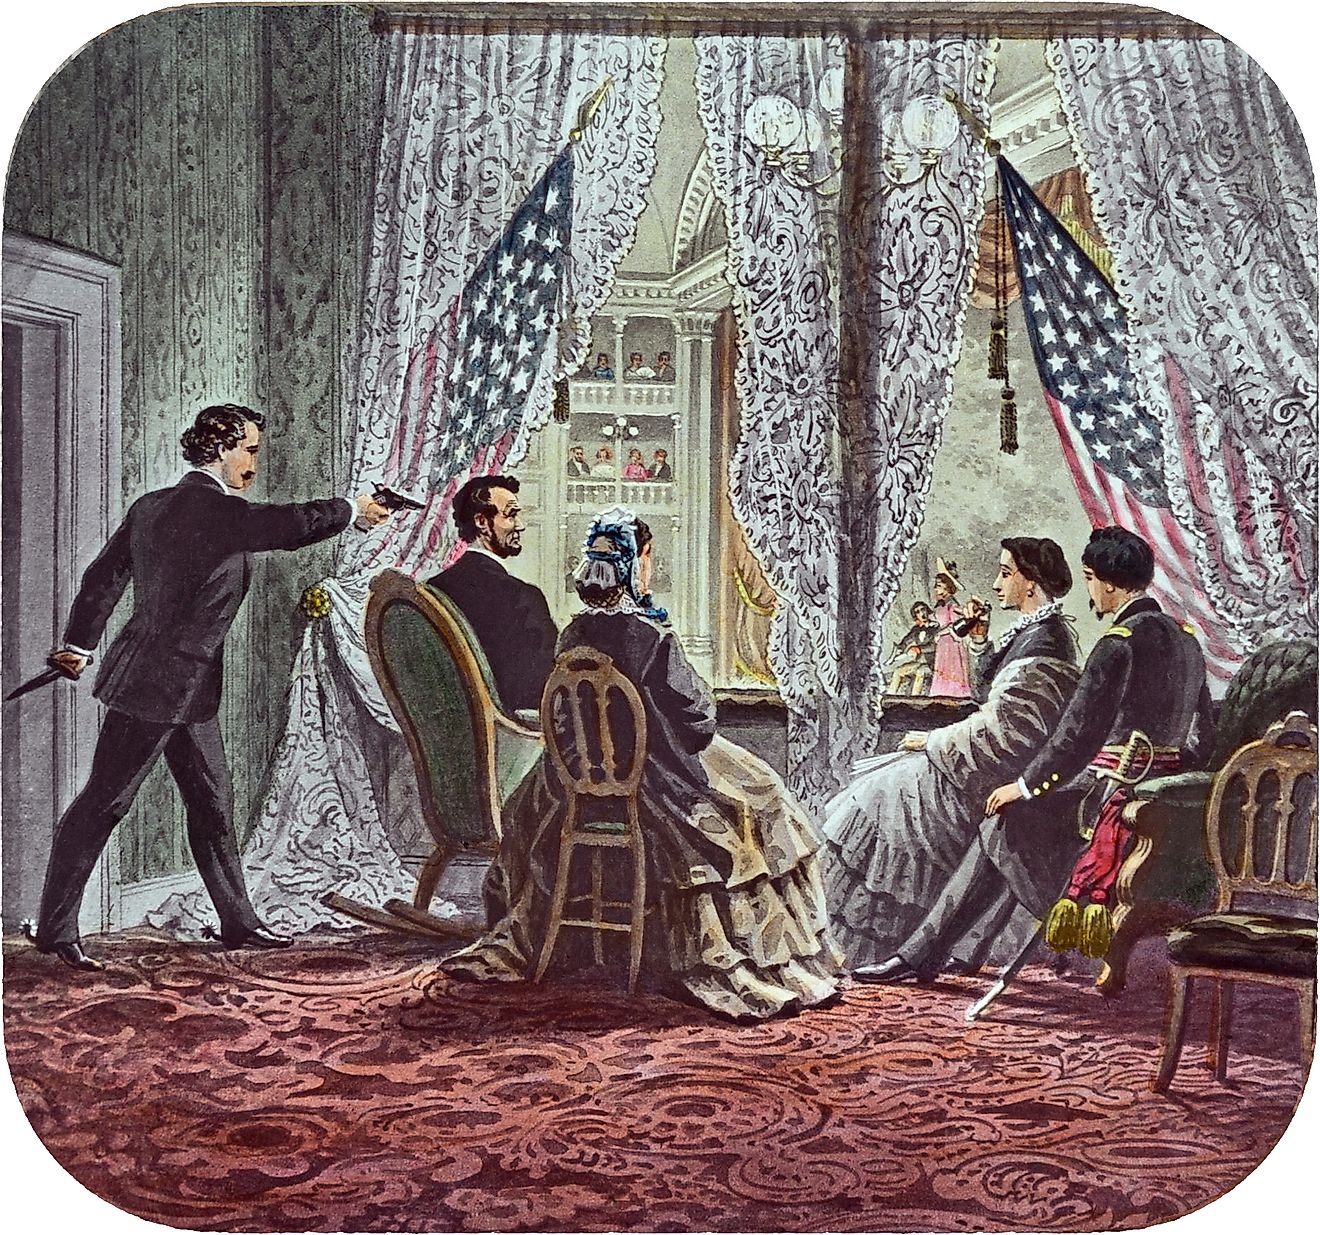 ohn Wilkes Booth leaning forward to shoot President Abraham Lincoln as he watches Our American Cousin at Ford's Theater in Washington, D.C. 14 April 1865.